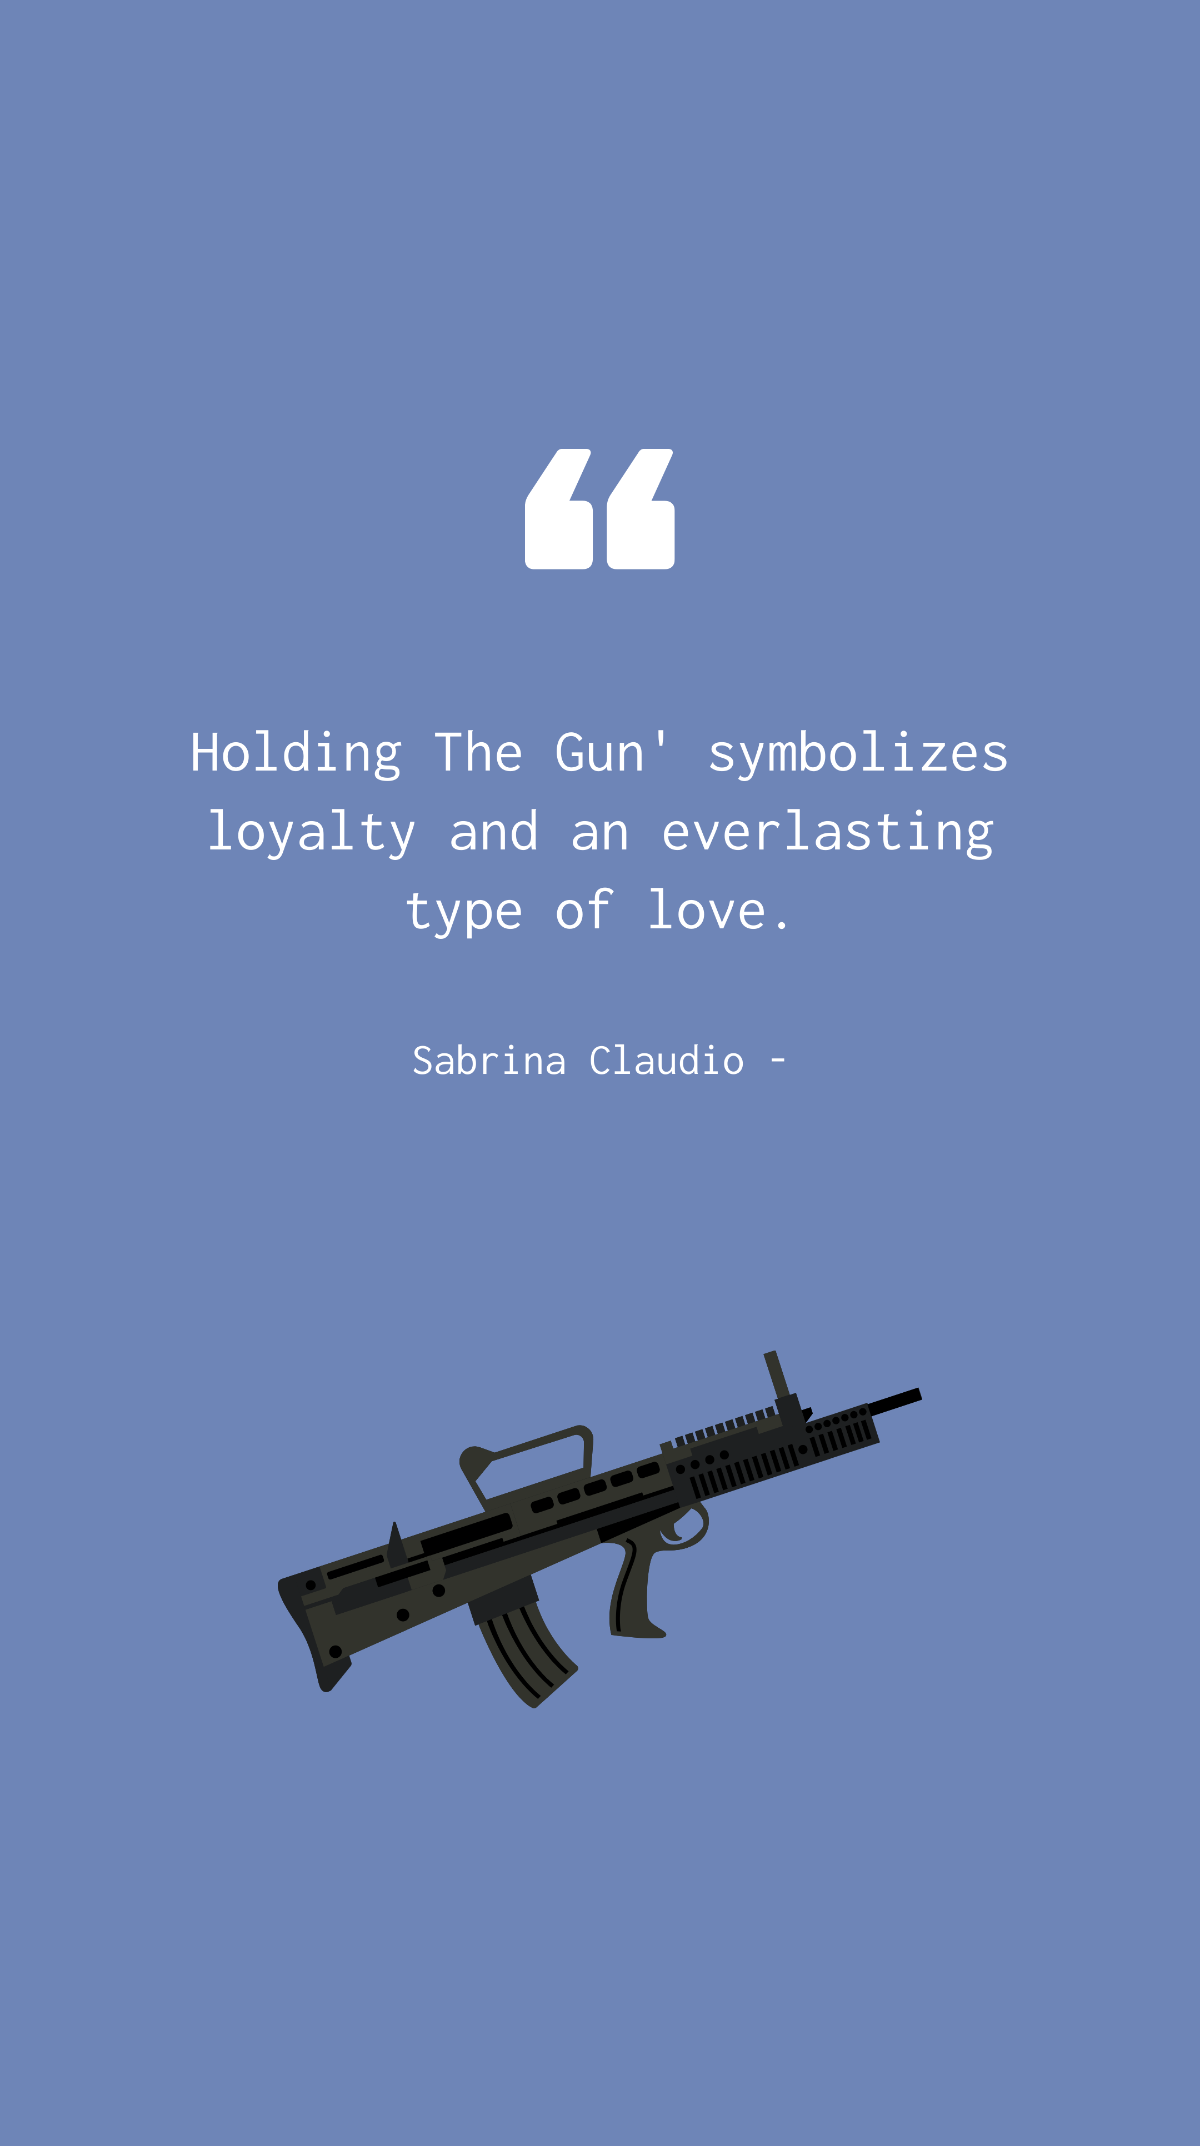 Free Sabrina Claudio - Holding The Gun' symbolizes loyalty and an everlasting type of love. Template